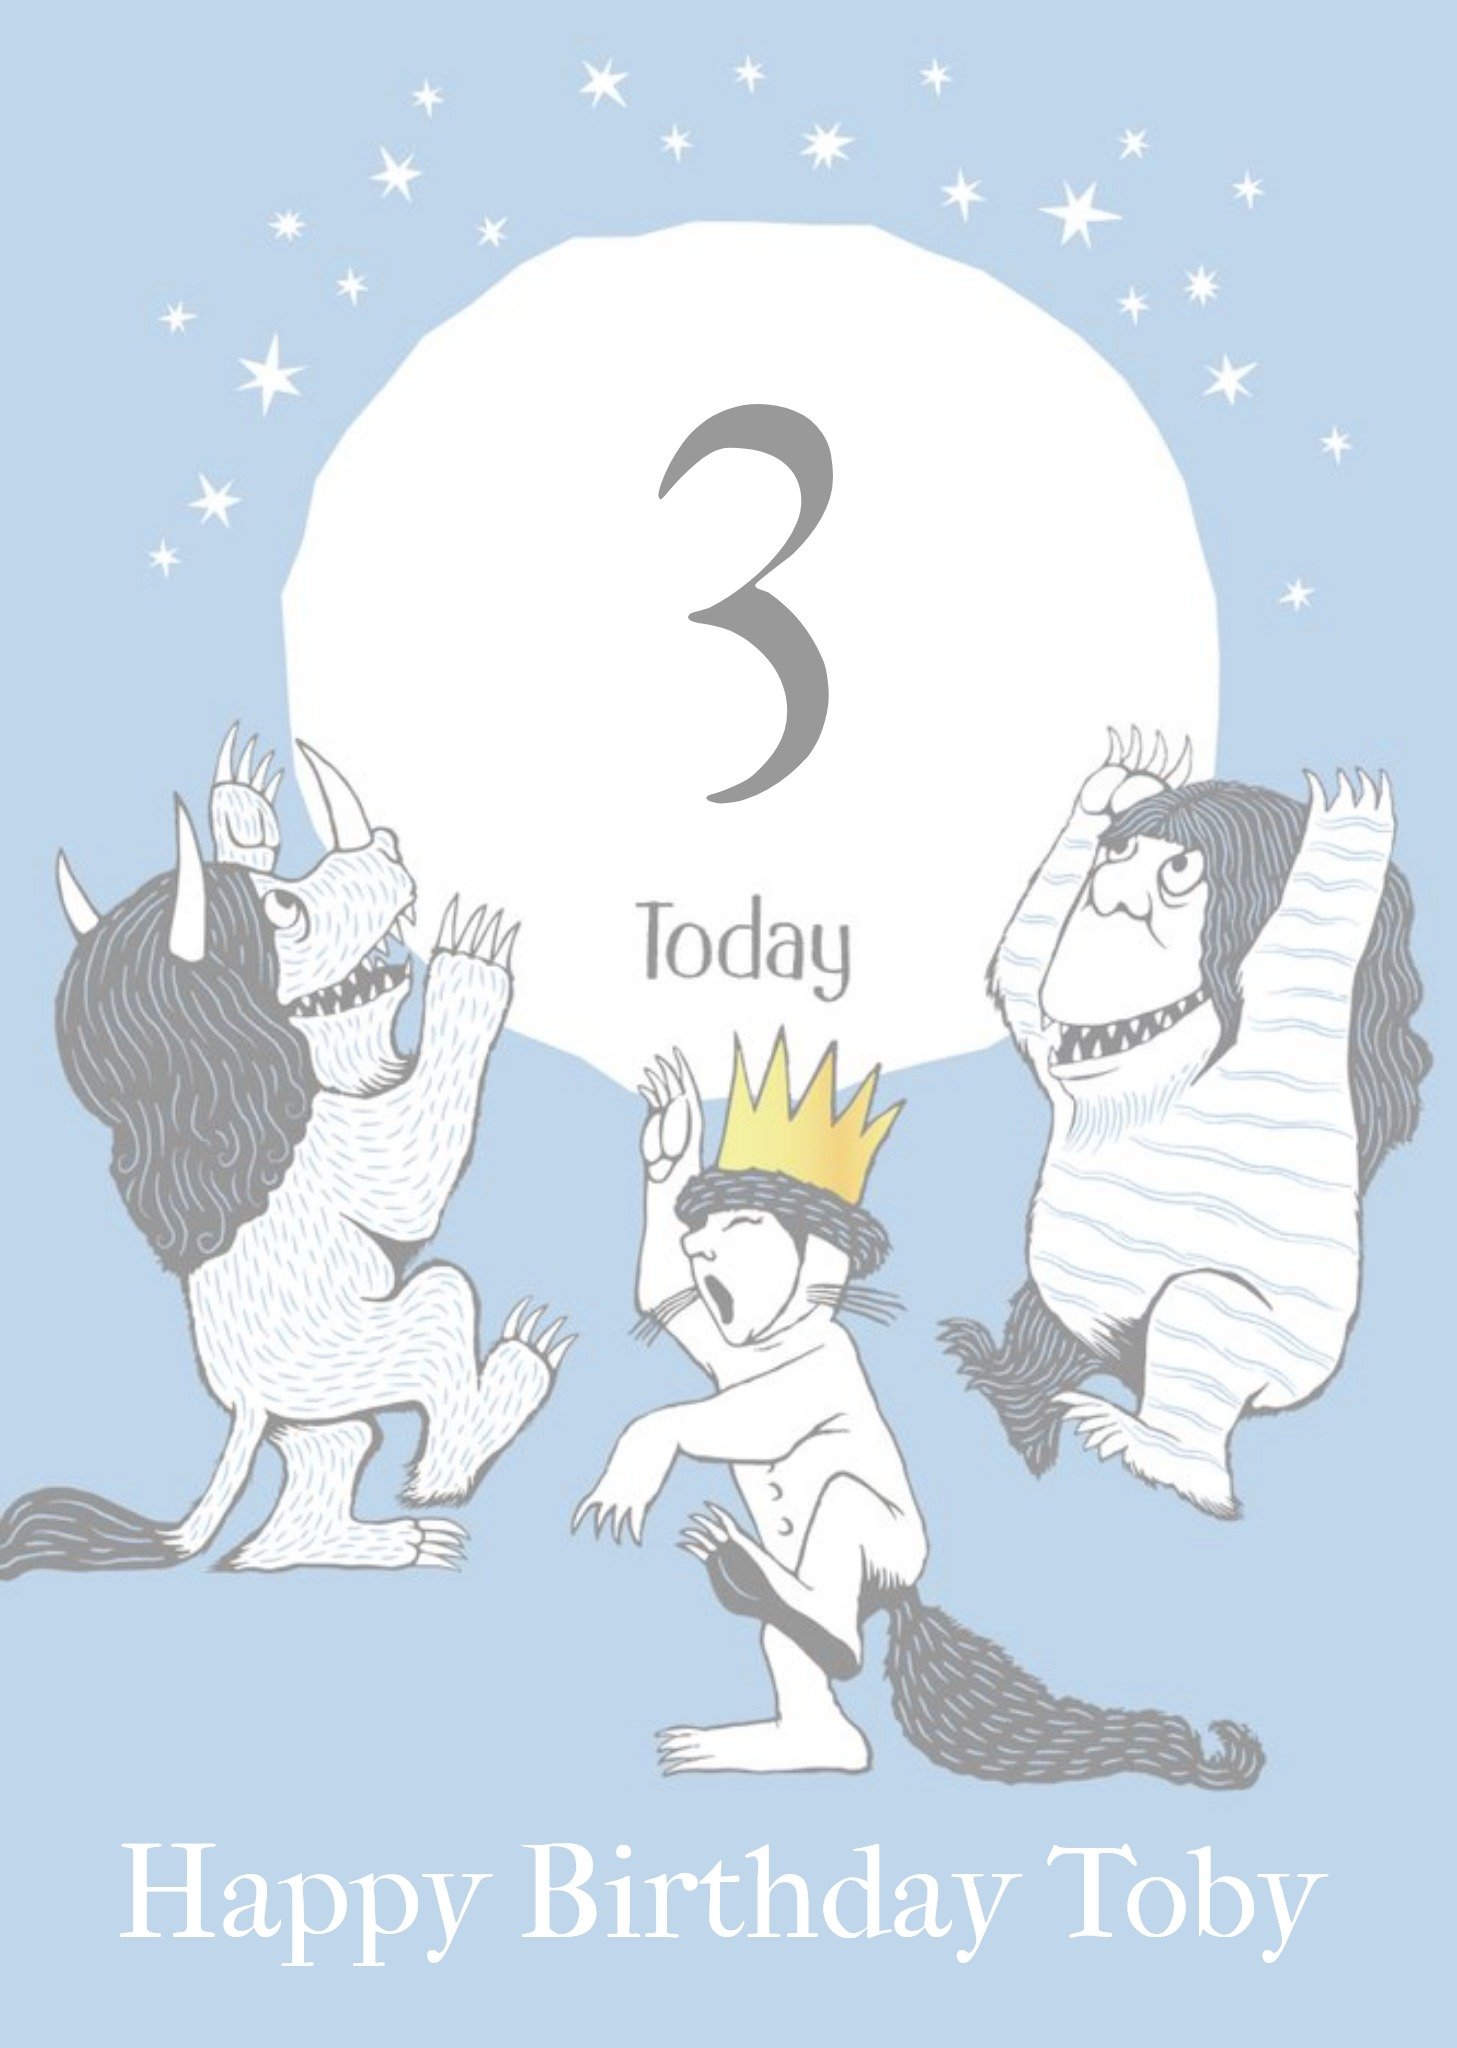 Moonpig Where The Wild Things Are 3 Today Birthday Card, Large